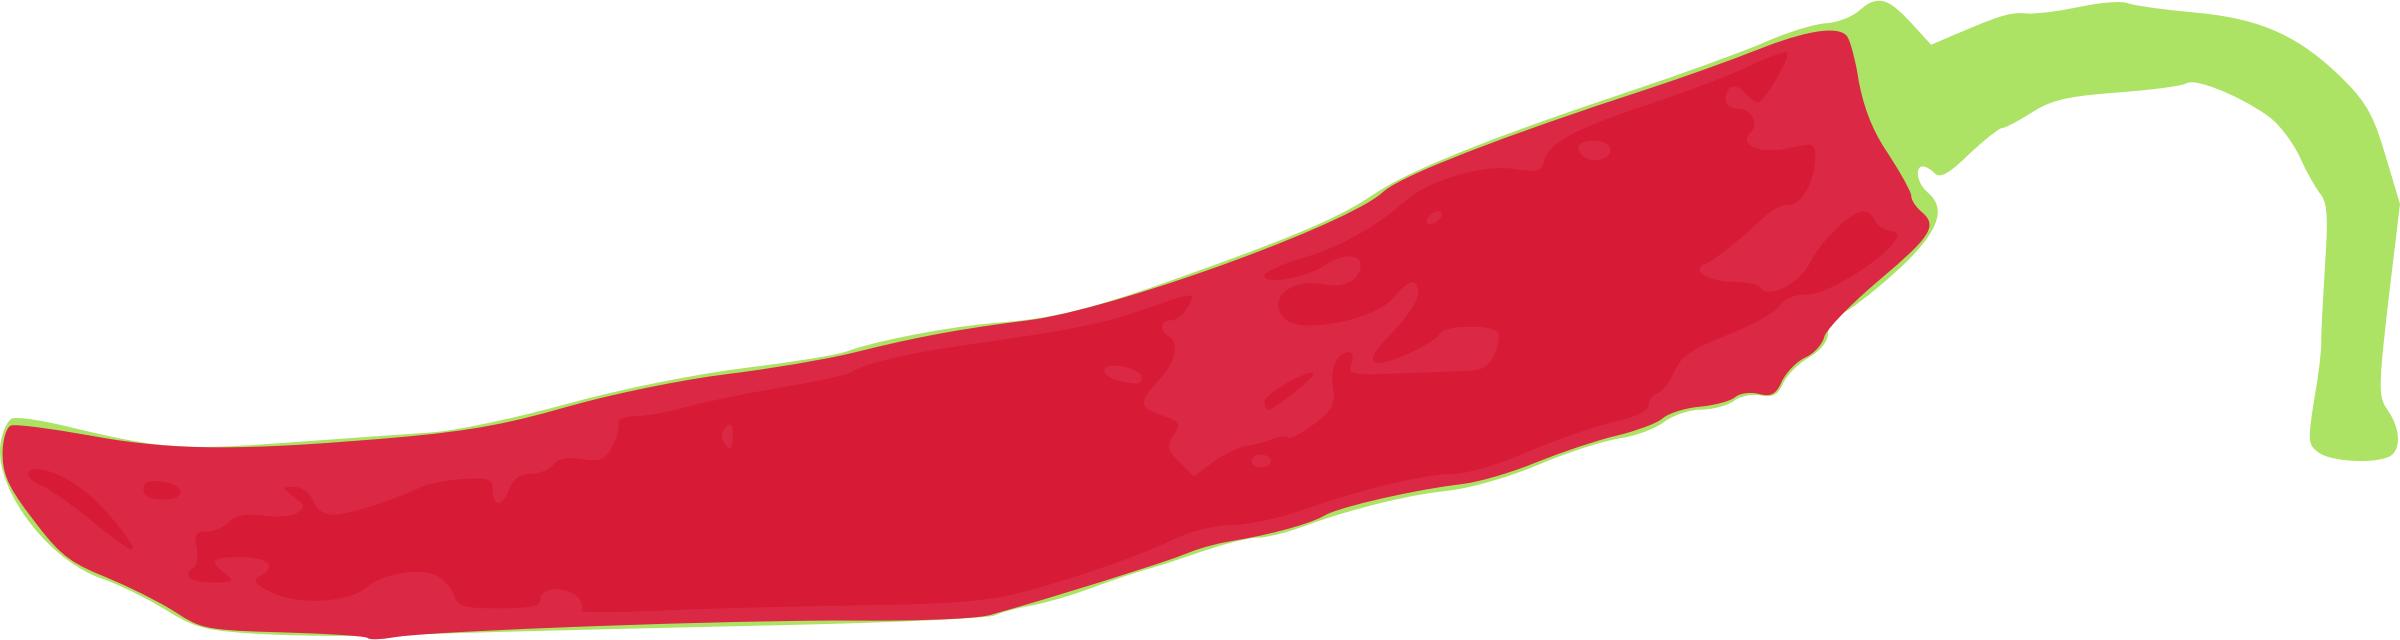 Red Pepper 1 png